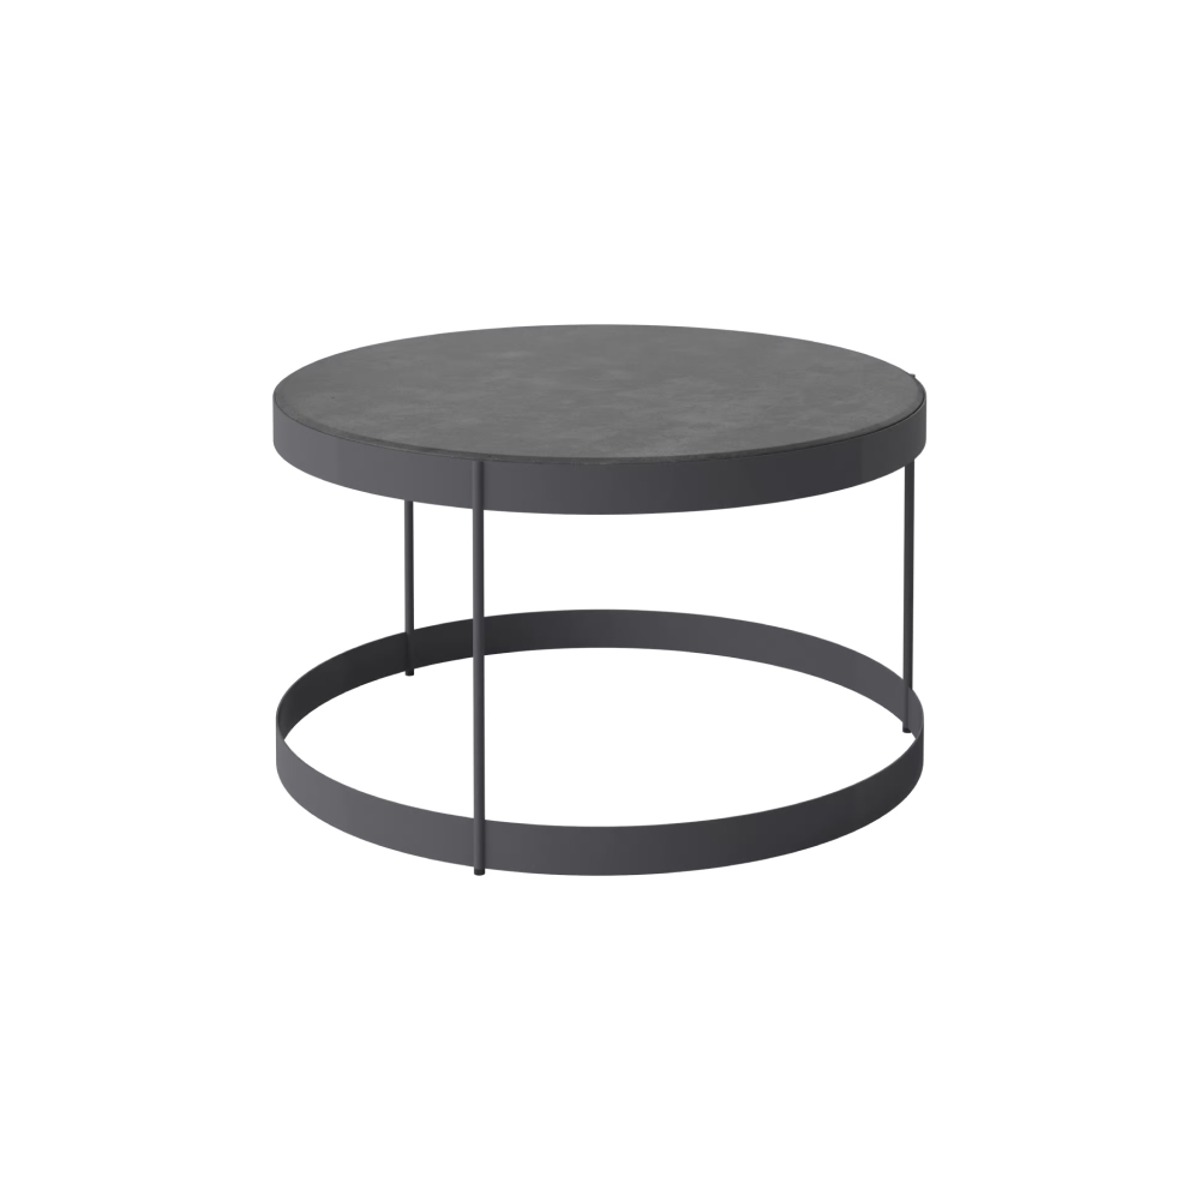 BOLIA [Outdoor] Drum Lounge Table Ø60